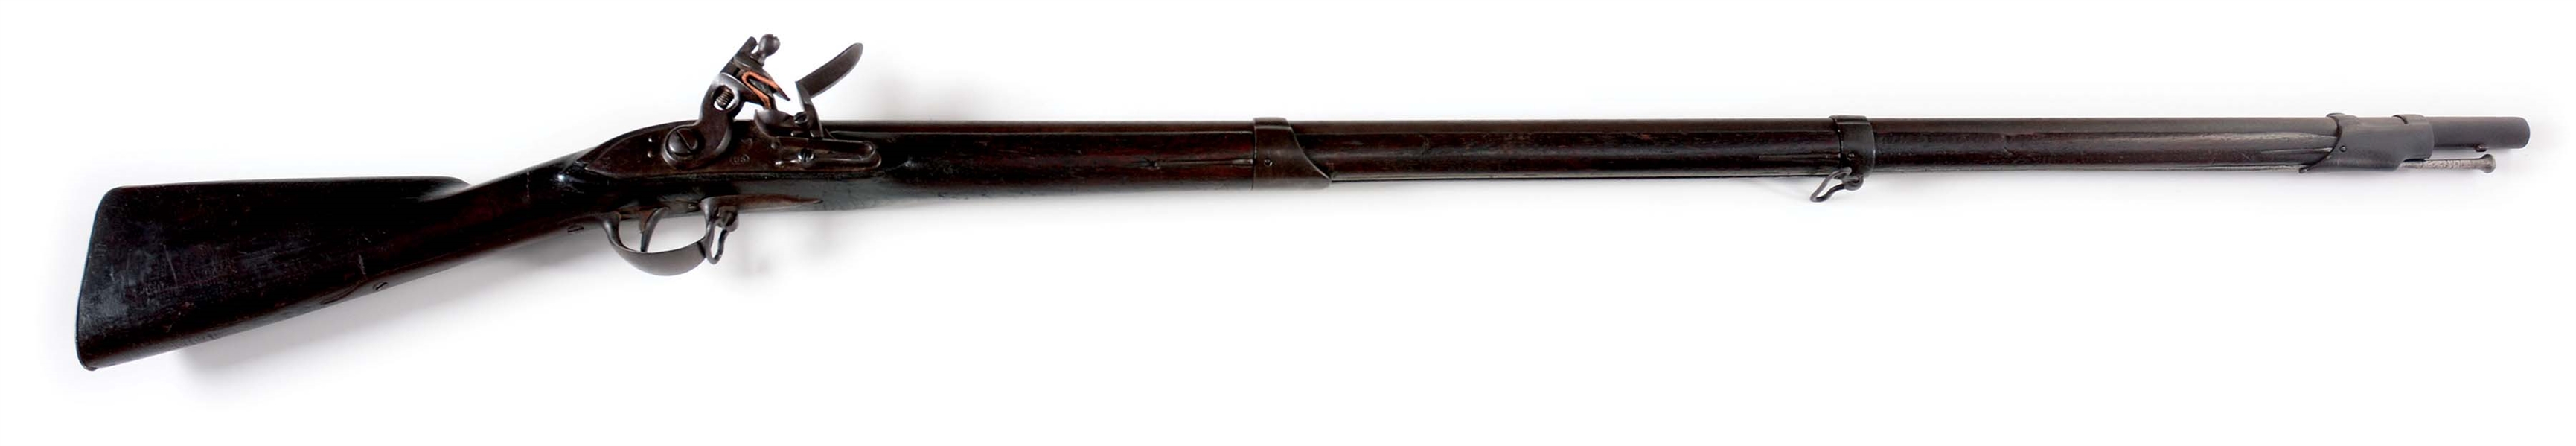 (A) 1808 JOHN YOUNG CONTRACT MUSKET.